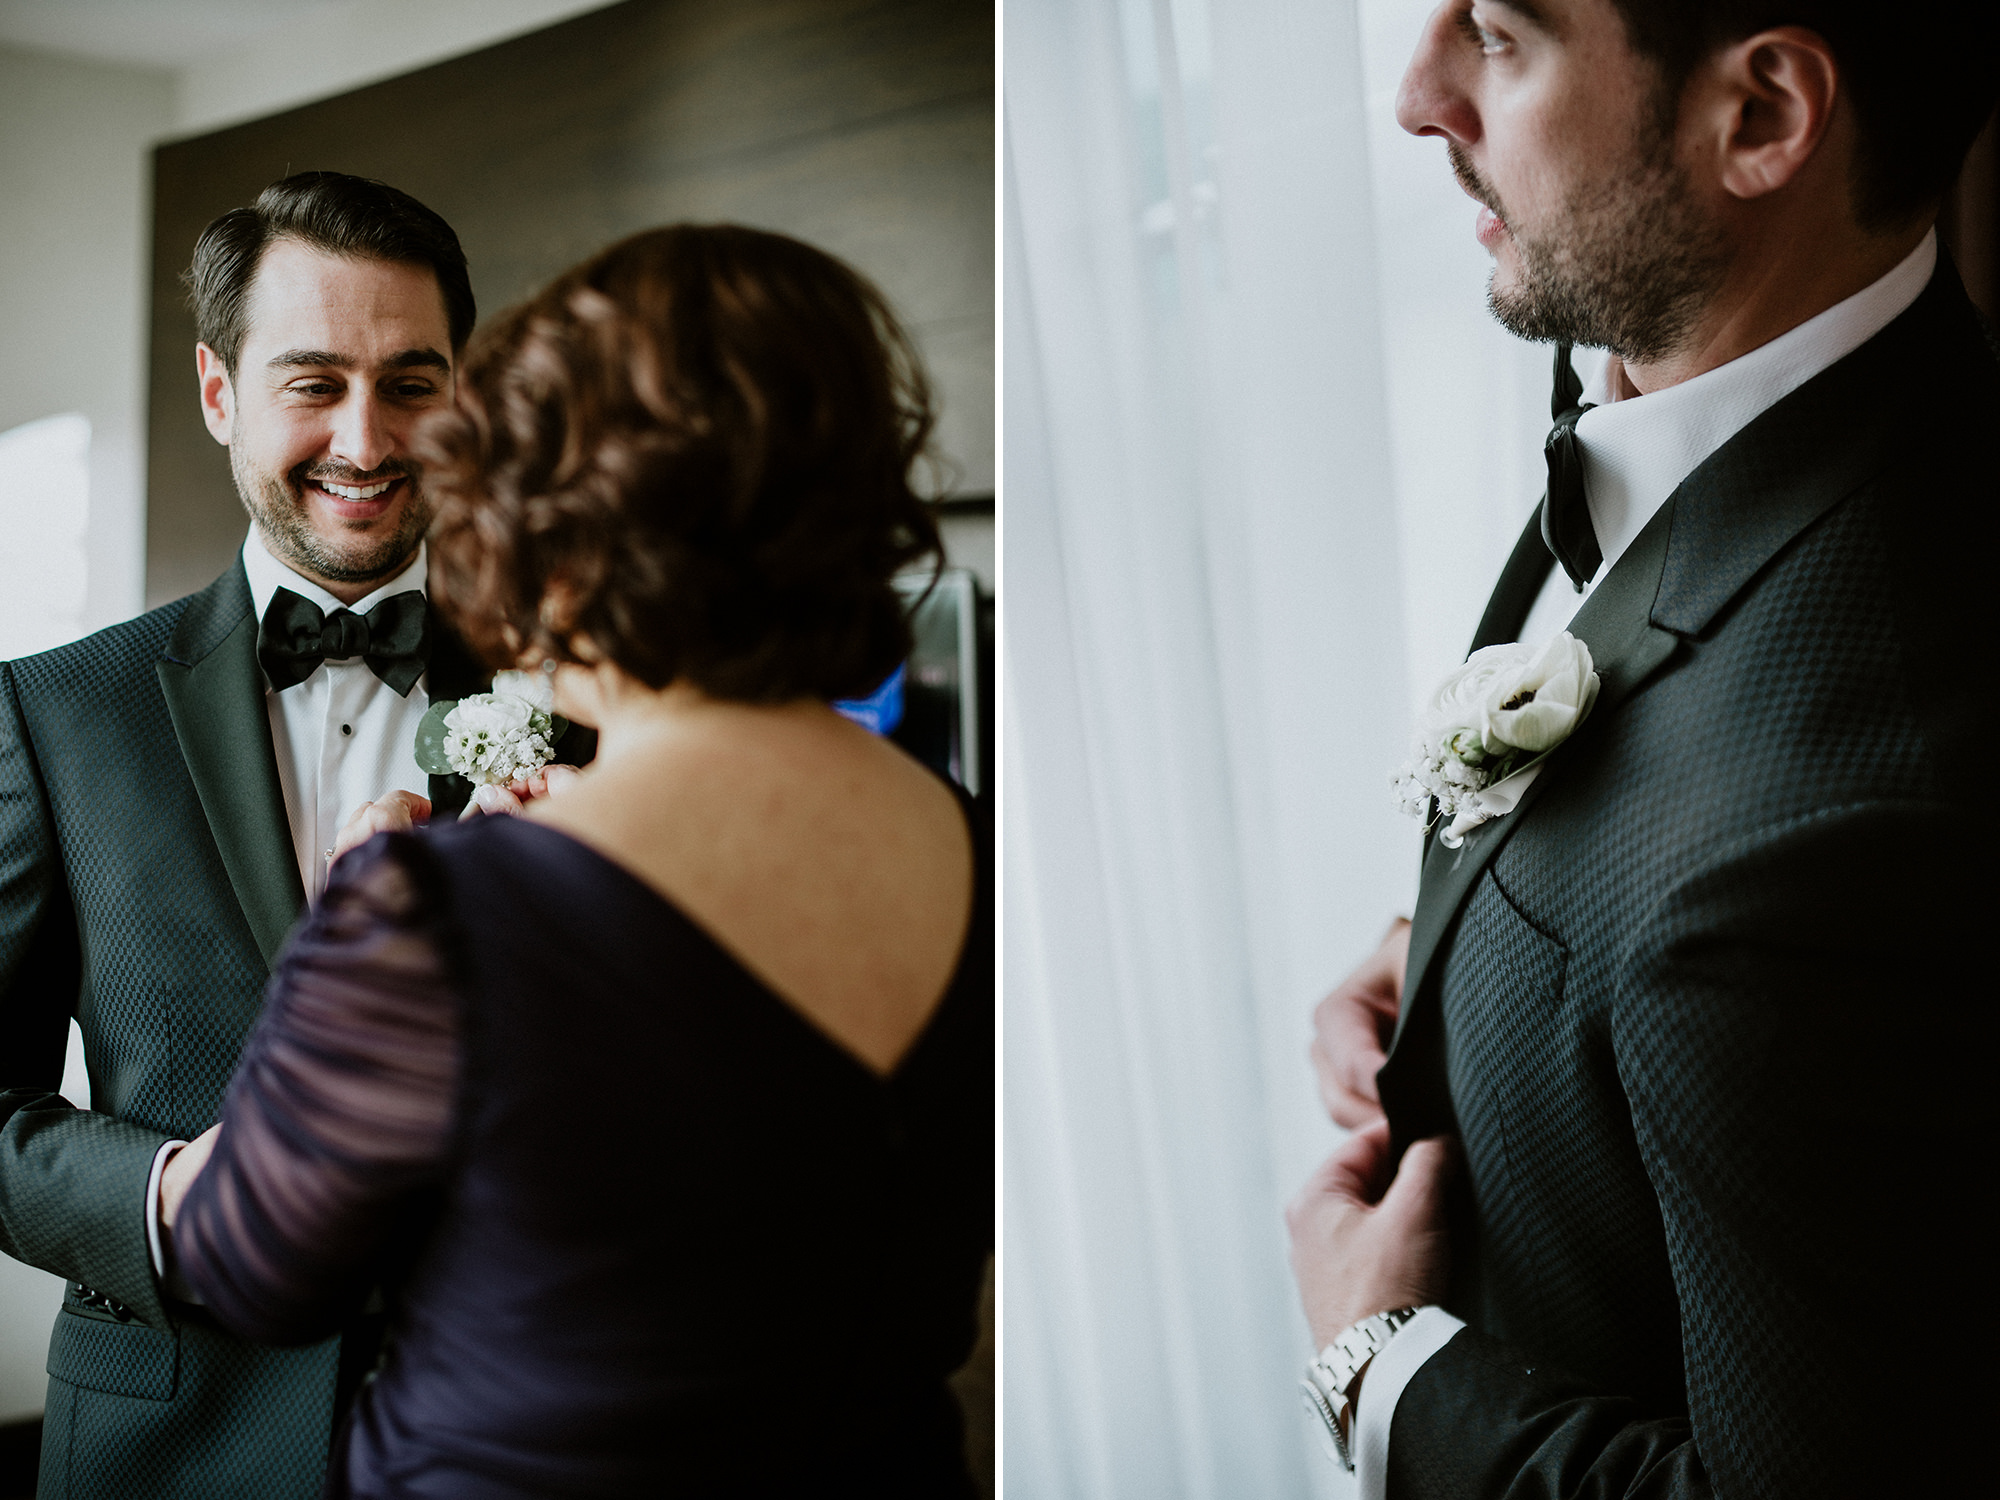 mom pins boutonniere on son